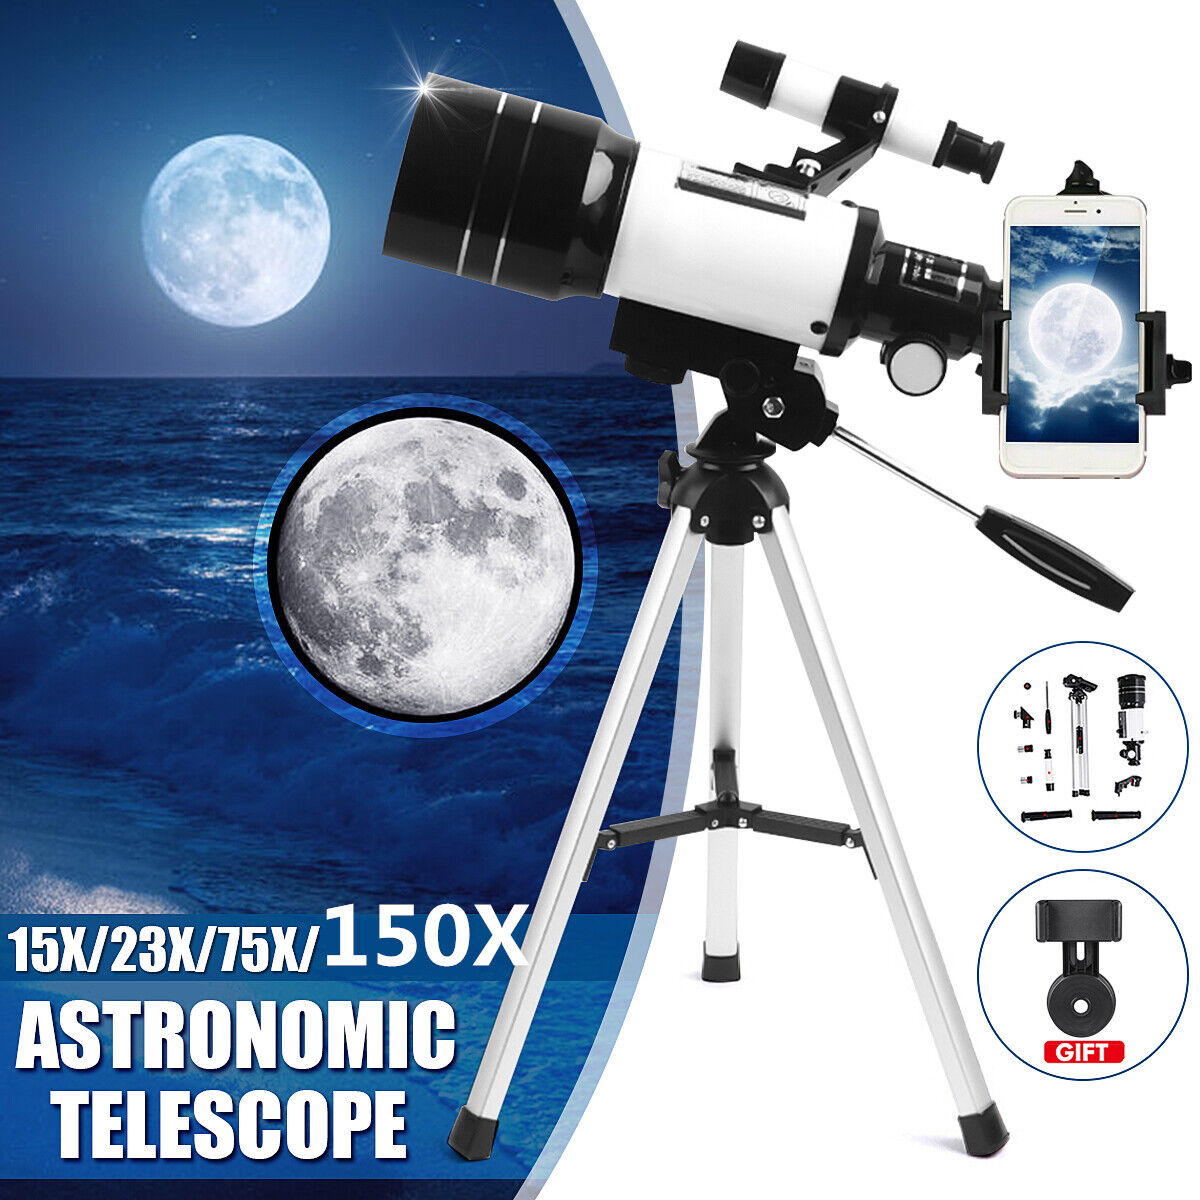 150X 70mm Aperture Astronomical Telescope Refractor Tripod Finder For Beginners